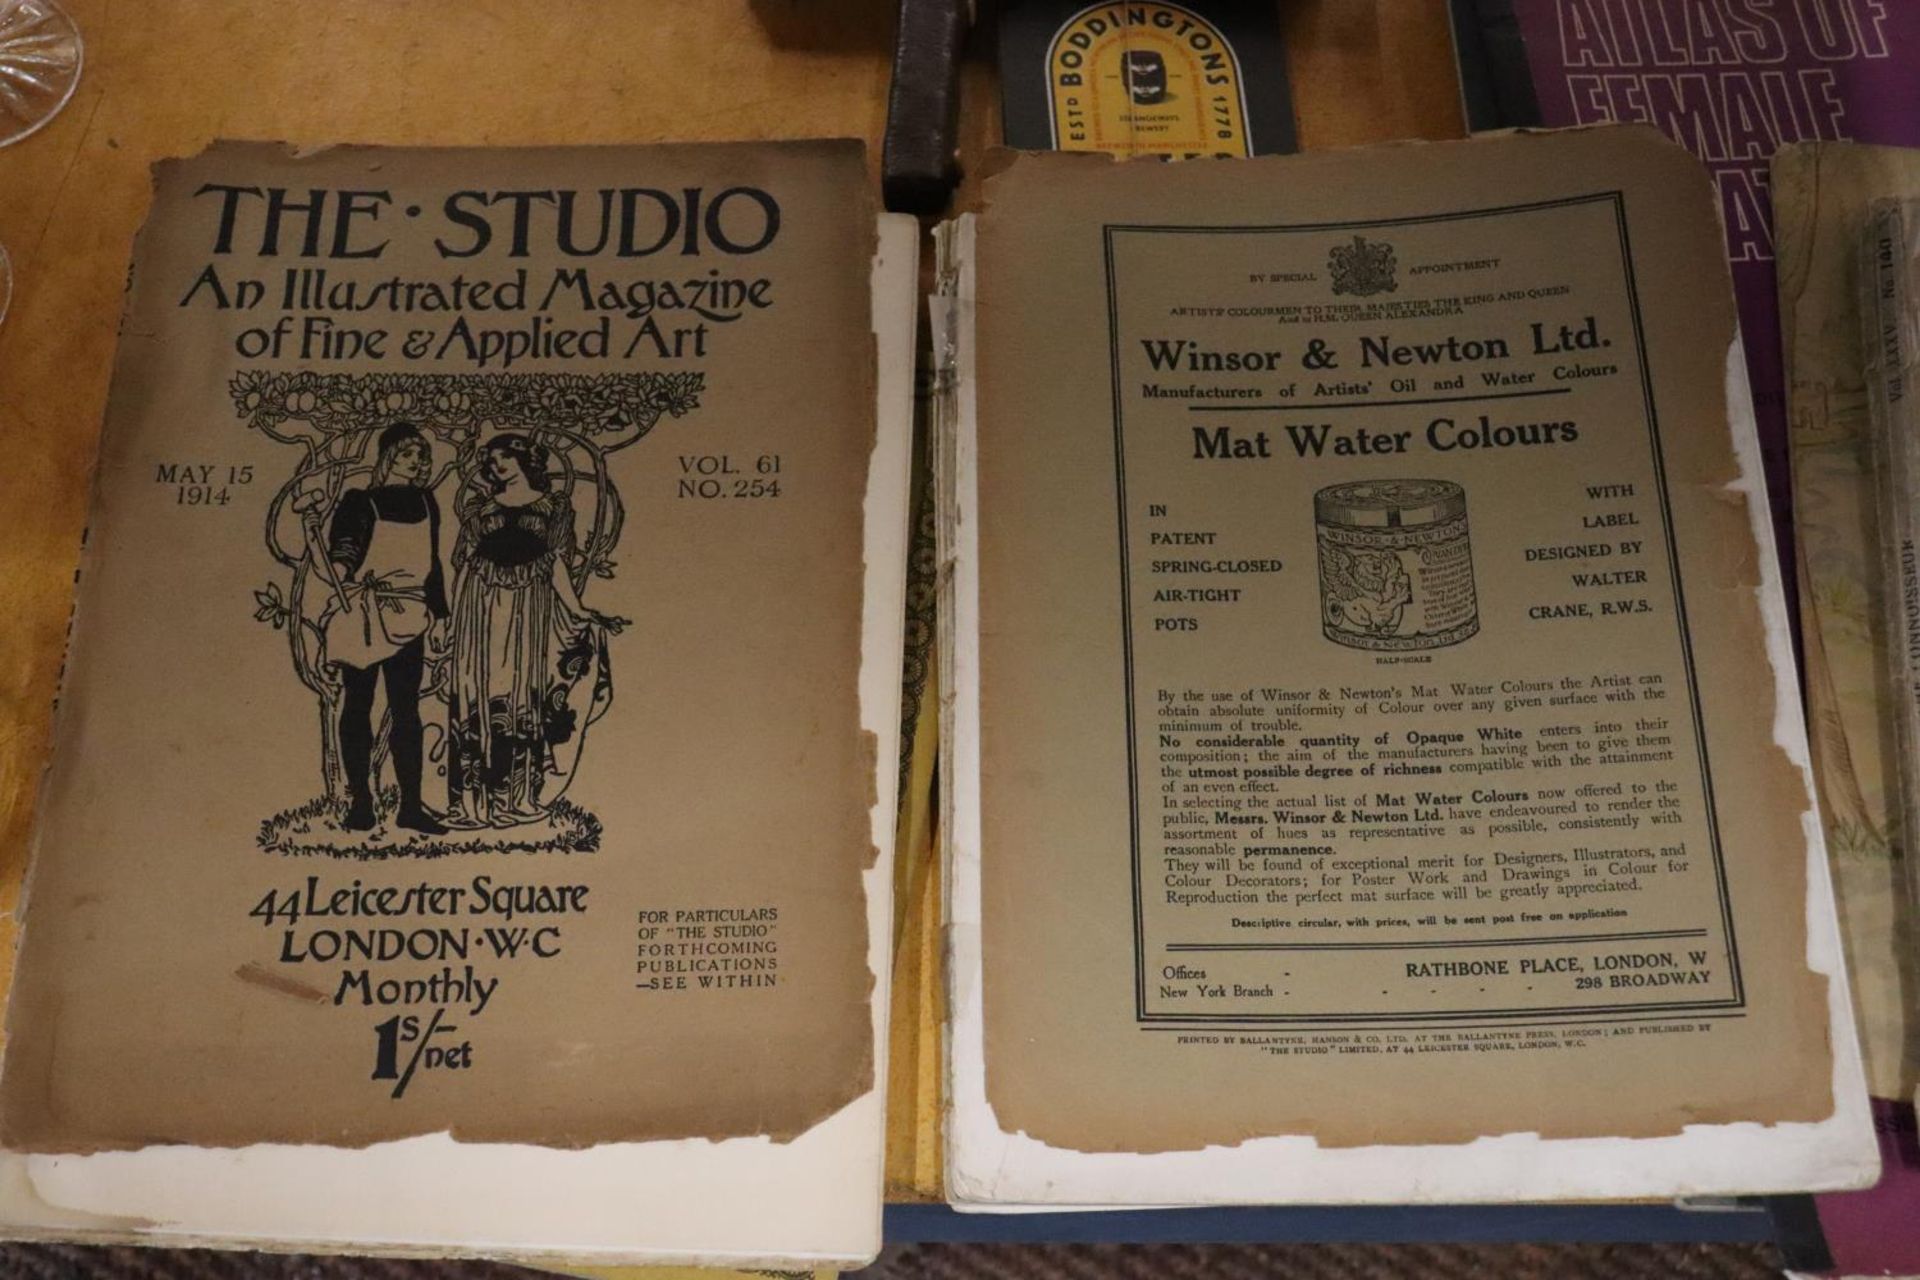 A 1914 COPY OF 'THE STUDIO' MAGAZINE, A SOUVENIR COPY OF 'THE CONNOISSEUR', THE VISIT OF KING GEORGE - Image 4 of 4